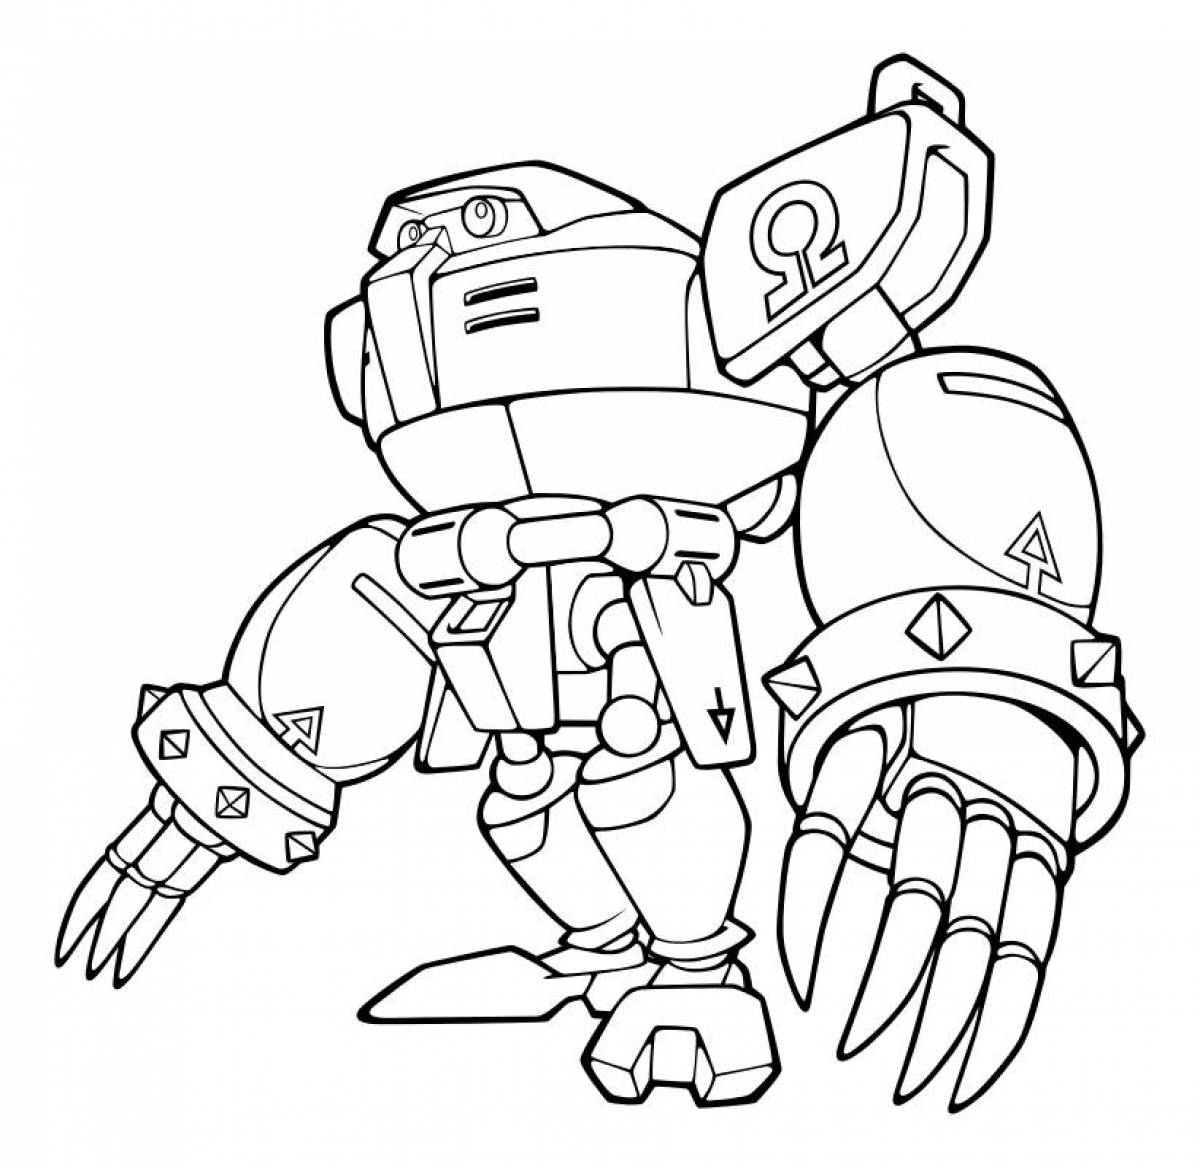 Robot coloring page for boys